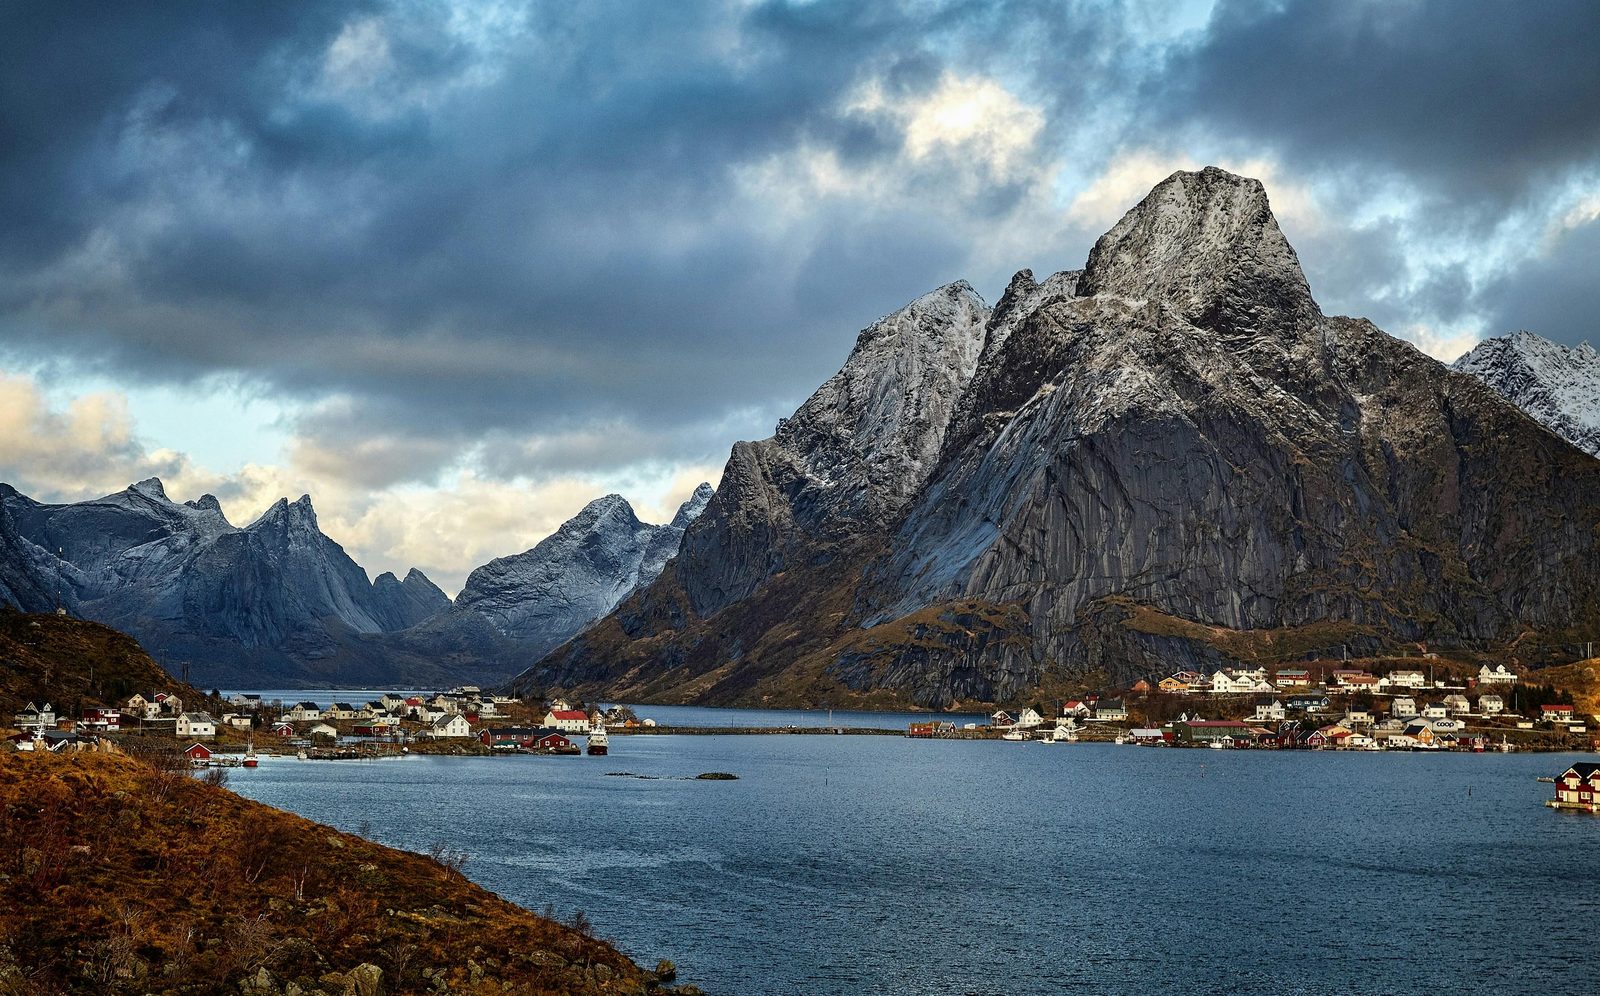 Southern Norway: the 10 most beautiful spots